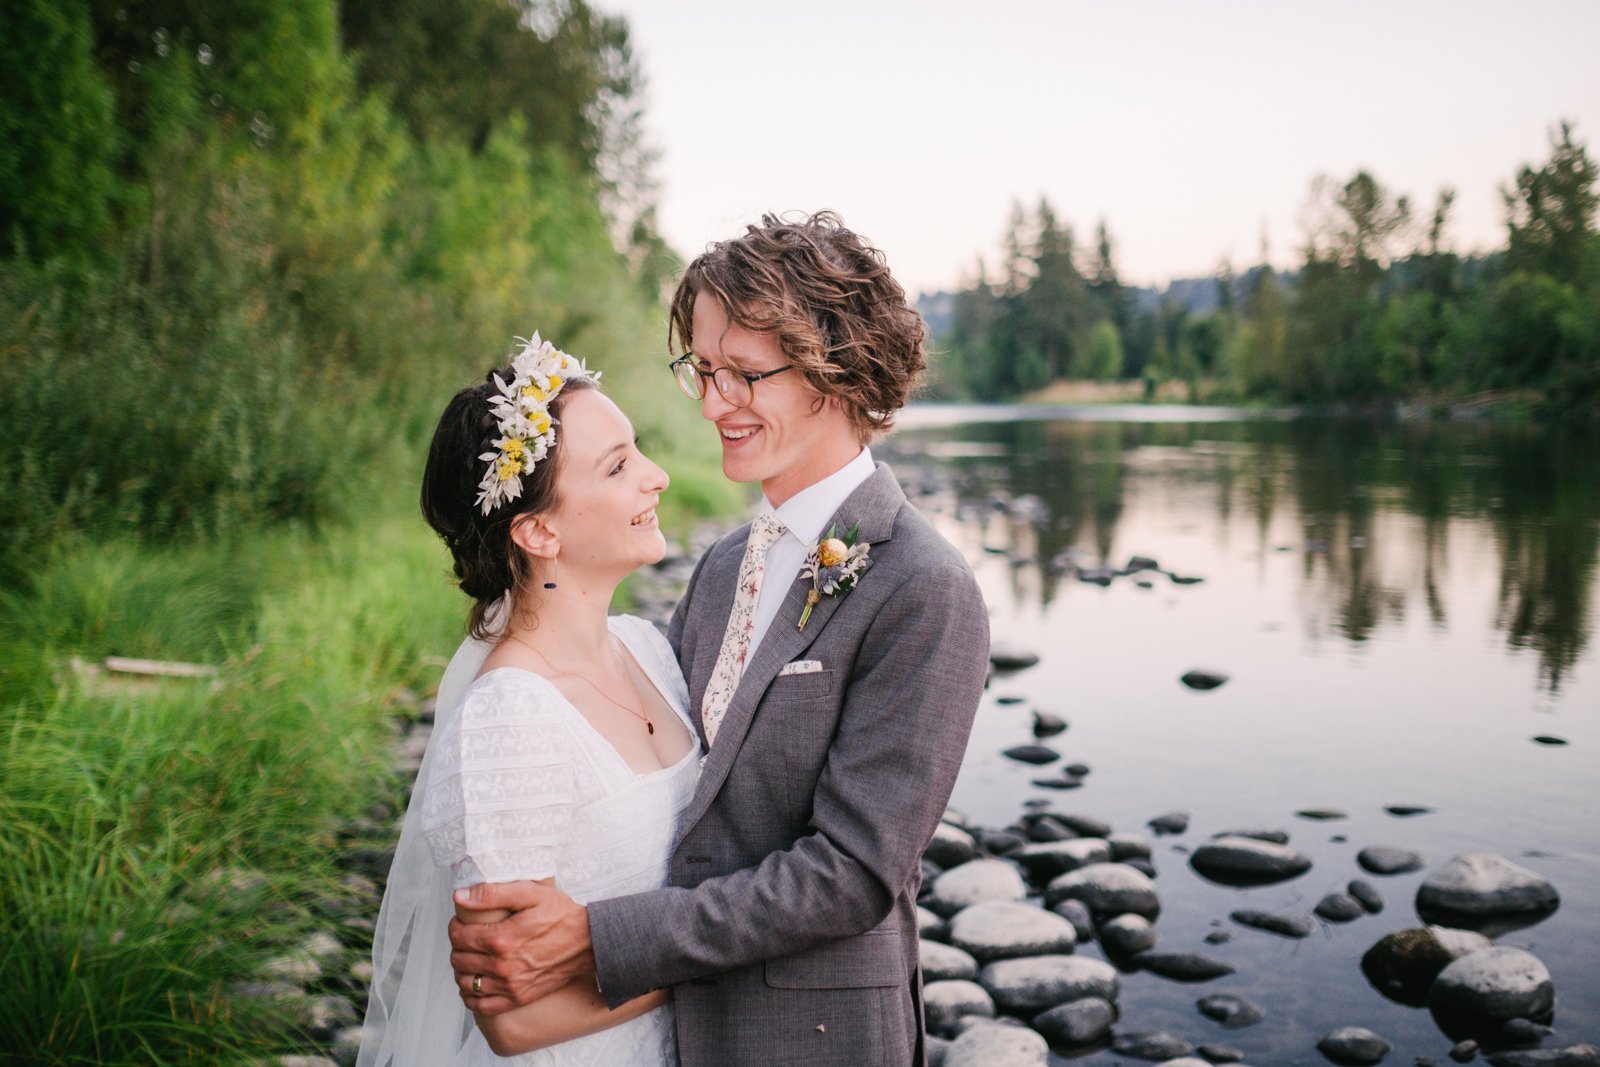  Bride and groom laugh together by river at late sunset 